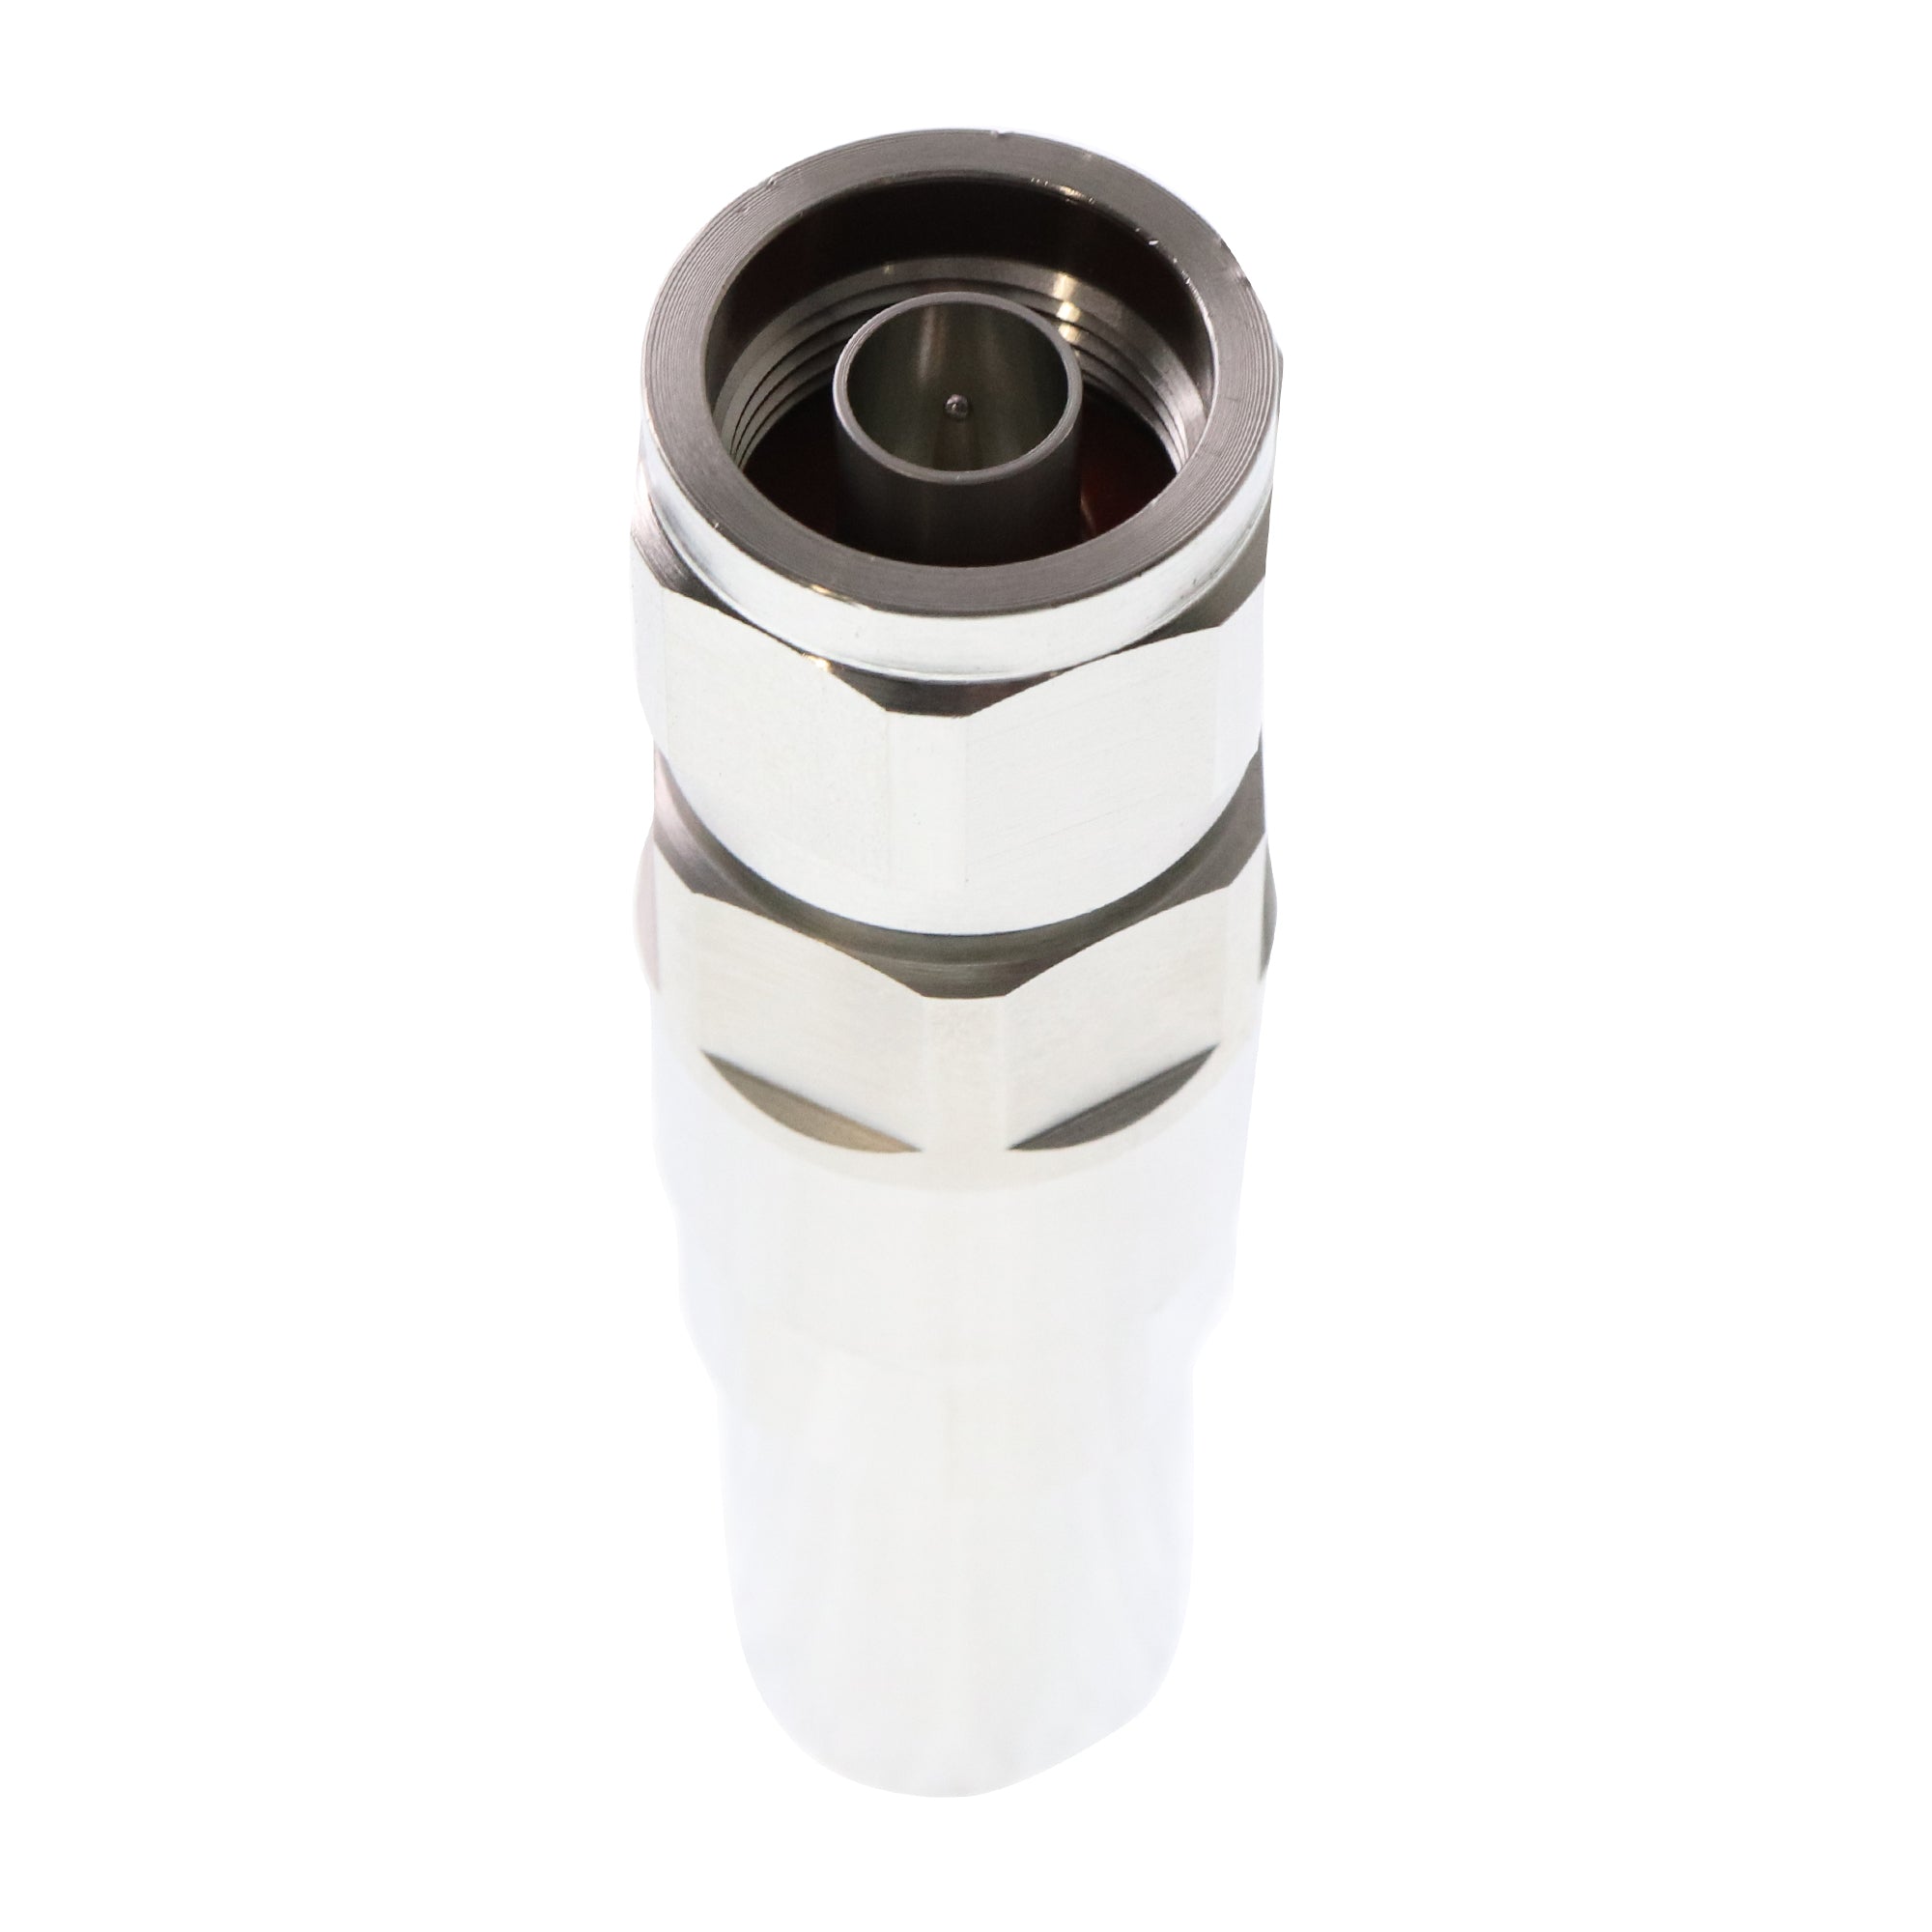 Commscope, COMMSCOPE 10645-350 L4-PSA MALE COAXIAL CABLE FITTING, ADAPTER, CONNECTOR